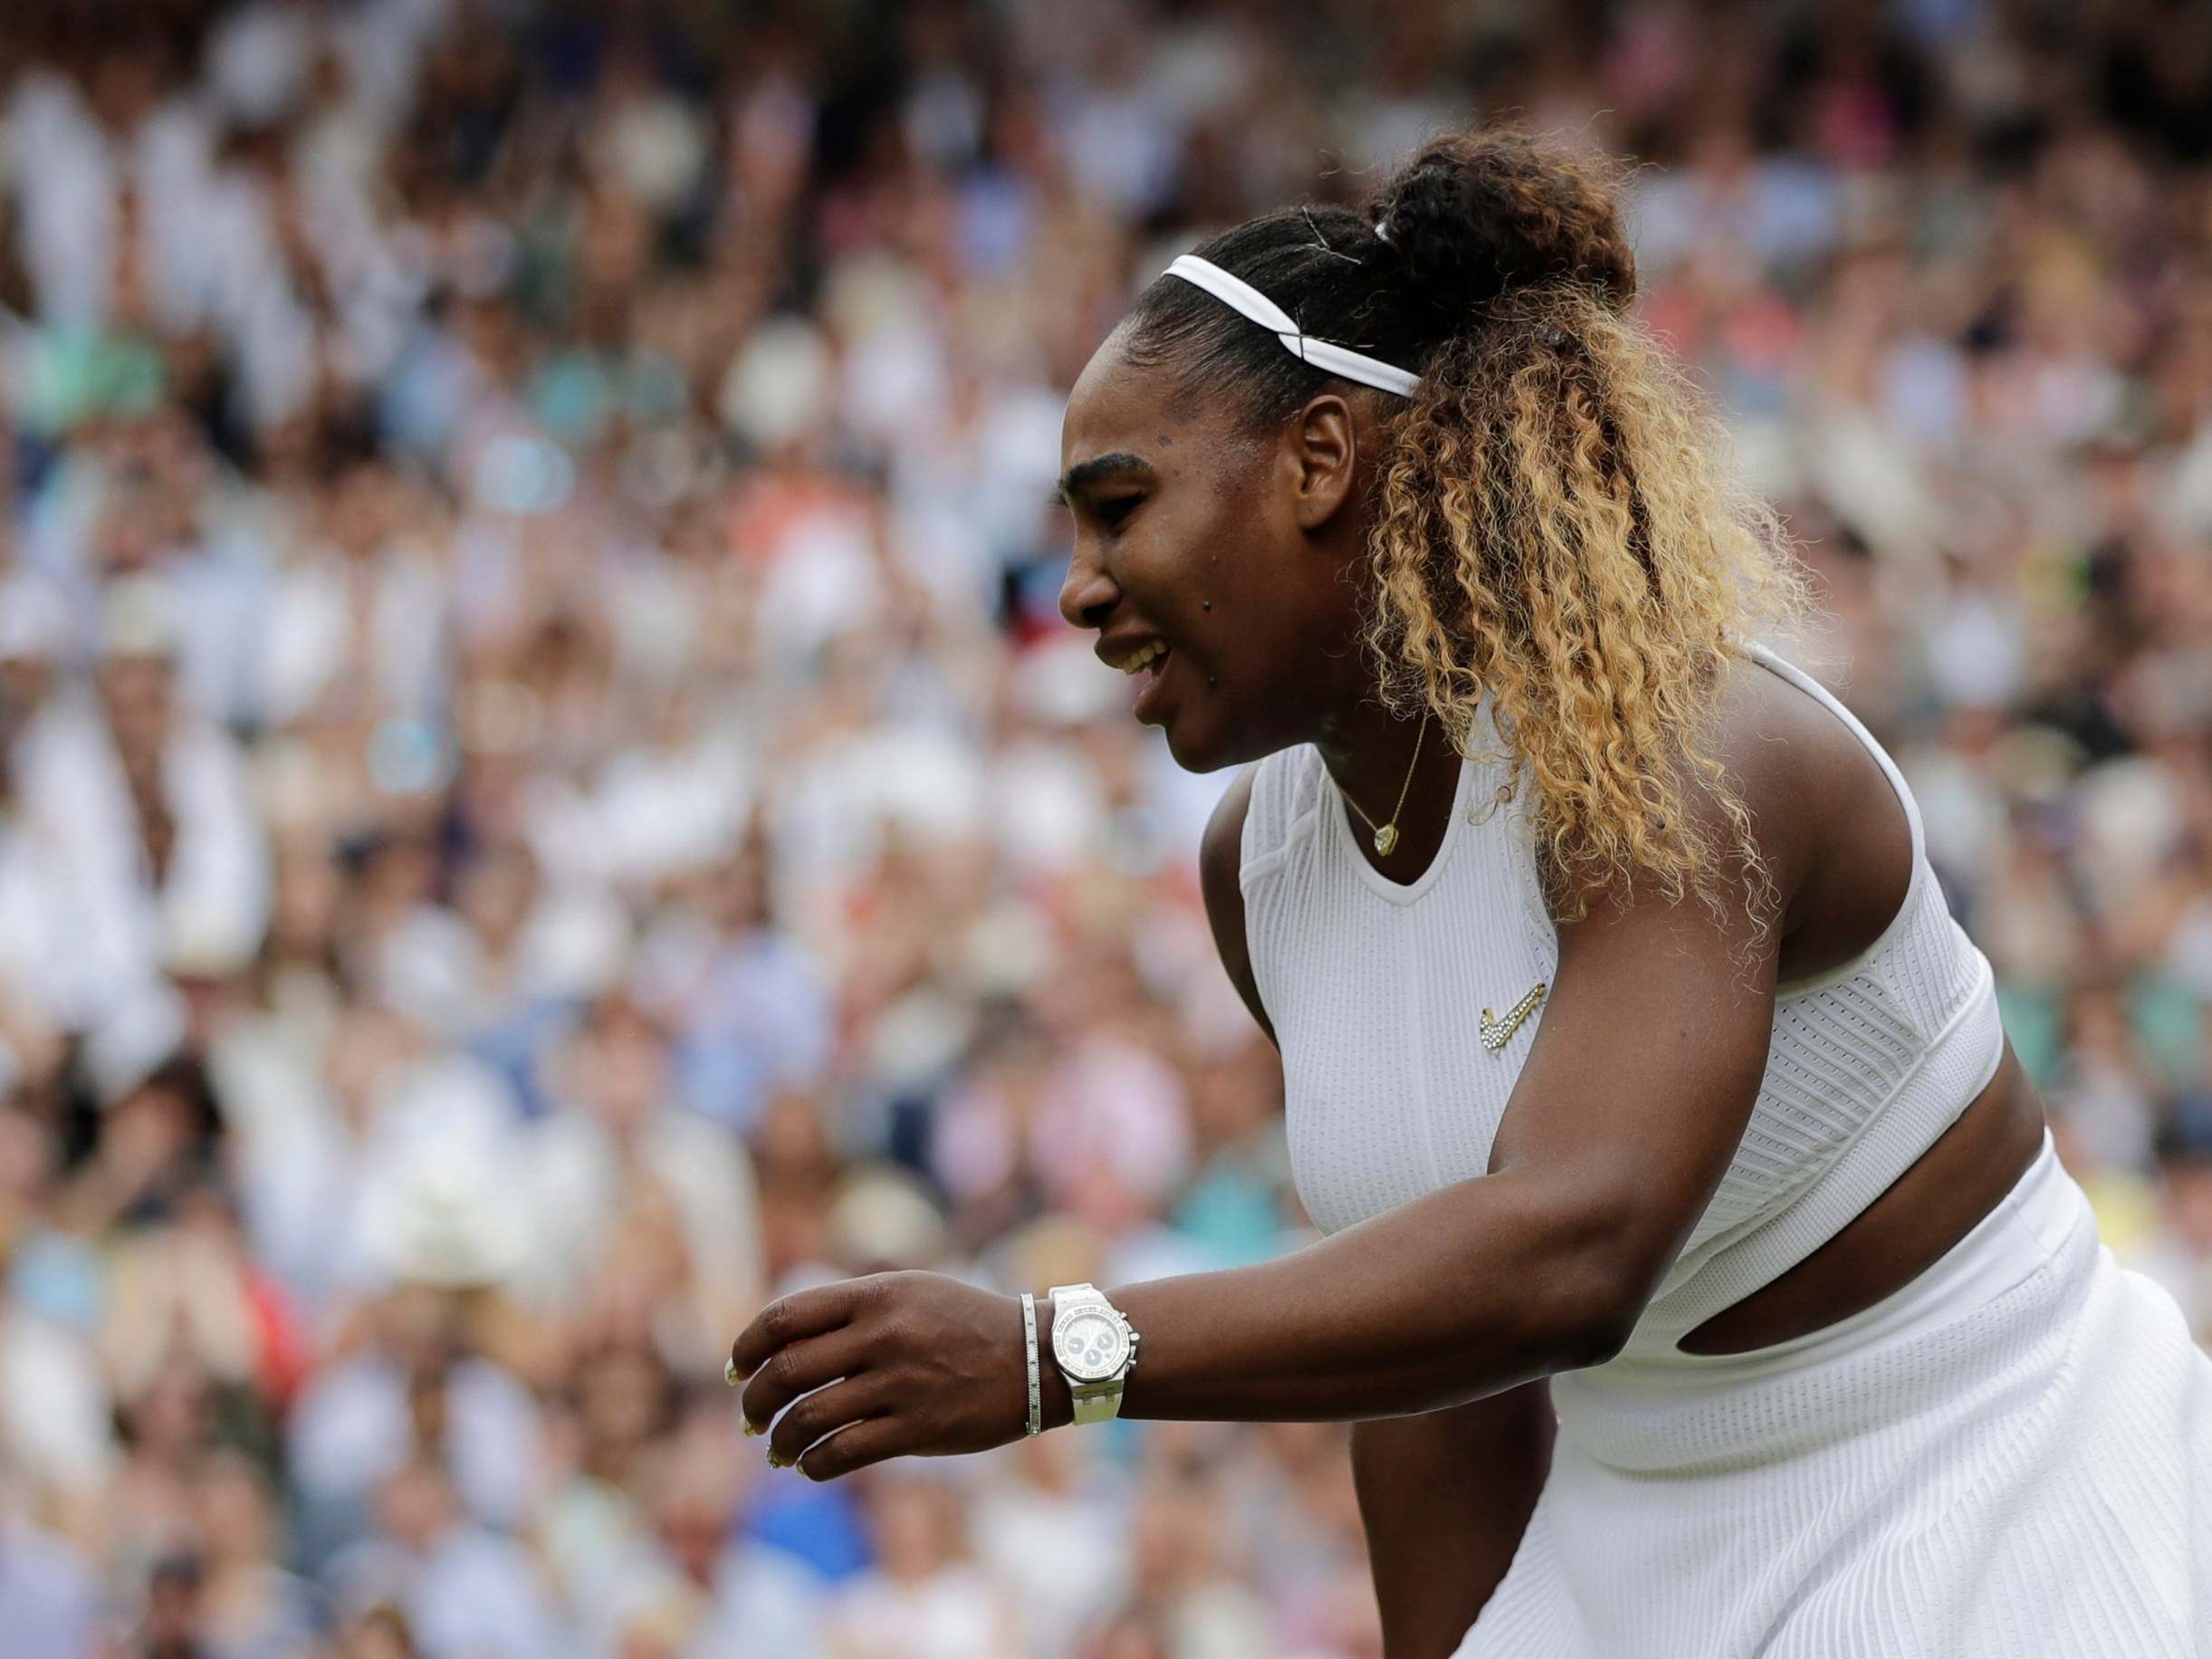 Serena Williams vs Maria Sharapova live stream How to watch US Open match online for free The Independent The Independent